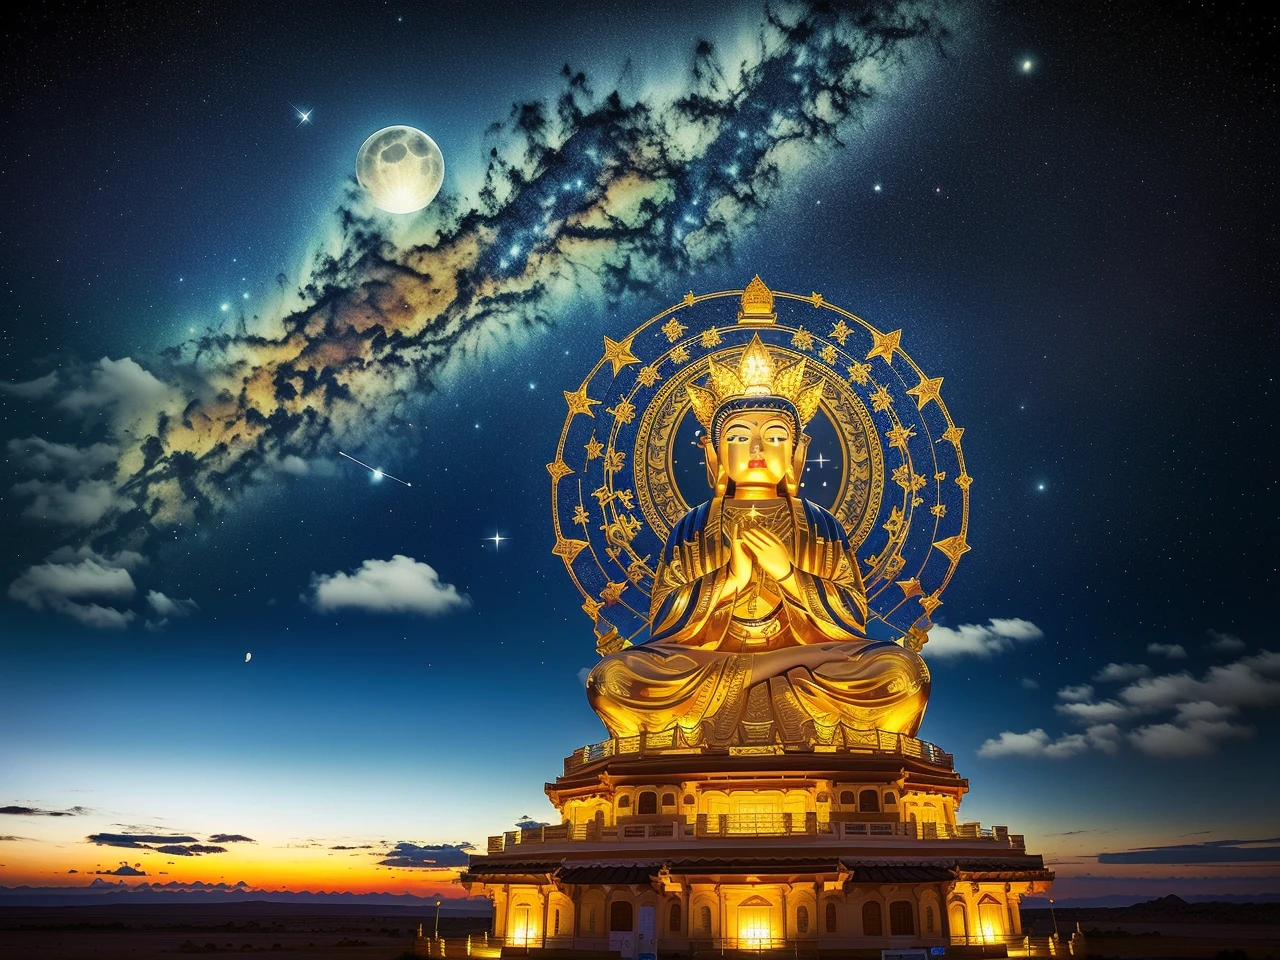 Mila, Maitreya Bodhisattva,Maitreya, a large golden buddha statue sitting in a room with a blue ceiling and a blue sky background with clouds, above_clouds, airship, aurora, bridge, building, castle, chimney, city, city_lights, cityscape, clock, clock_tower, cloud, cloudy_sky, constellation, crescent_moon, desert, earth_\(planet\), fireworks, floating_island, fountain, galaxy, glowing, house, island, lamppost, lantern, light_particles, milky_way, moon, mountain, night, night_sky, no_humans, planet, scenery, shooting_star, sky, skyline, skyscraper, snow, snowing, space, star_\(sky\), star_\(symbol\), starry_sky, starry_sky_print, telescope, tower, town, twilight, watercraft